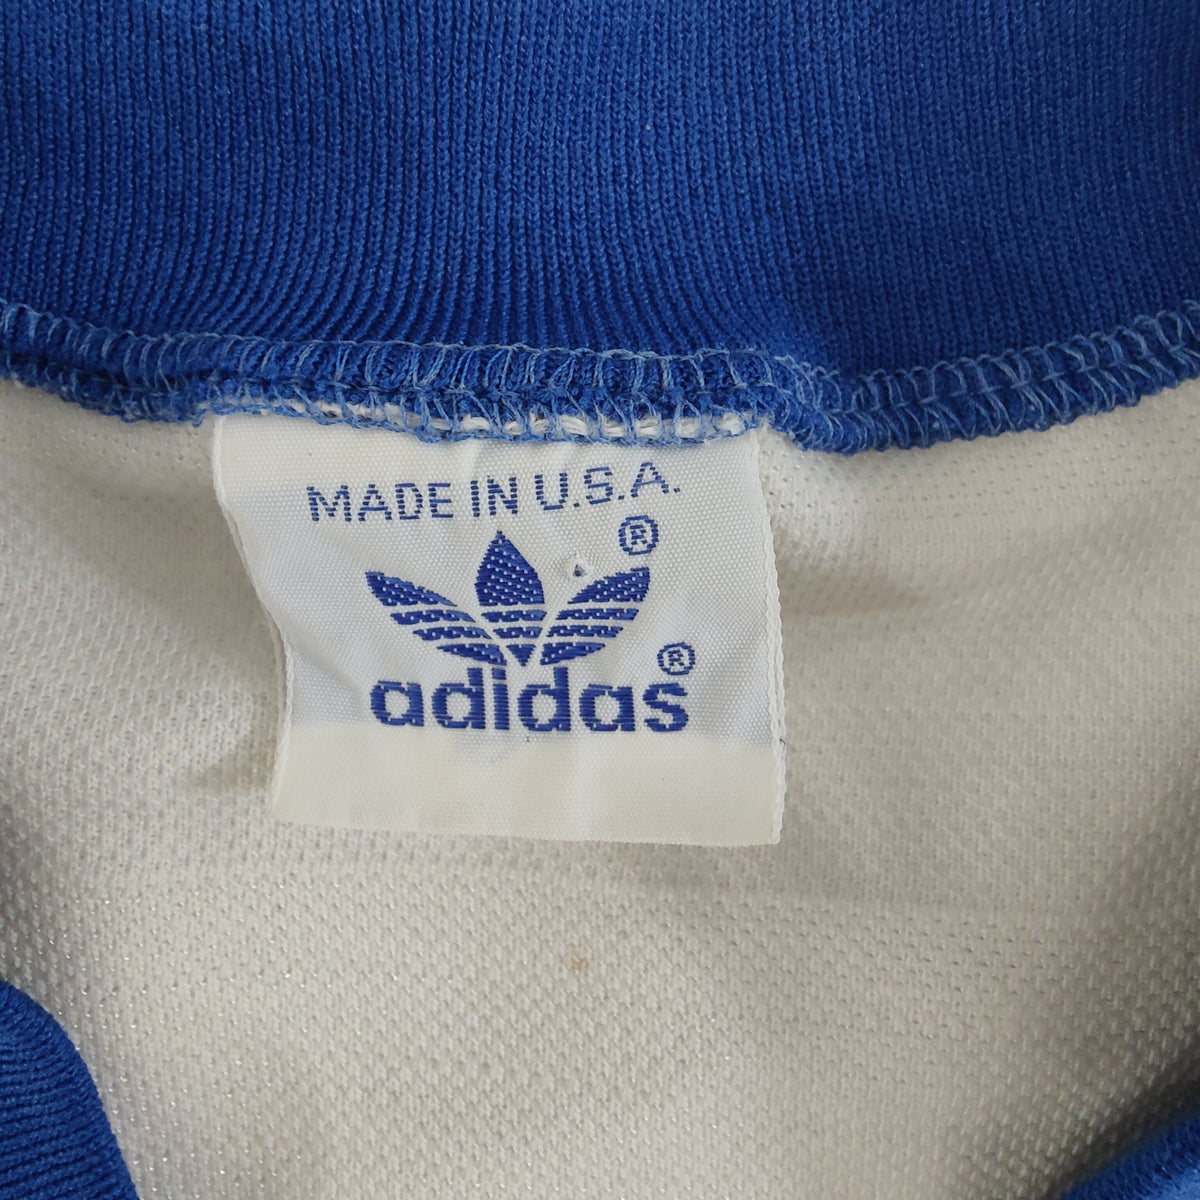 Vintage Adidas long sleeve template made in USA | retroiscooler